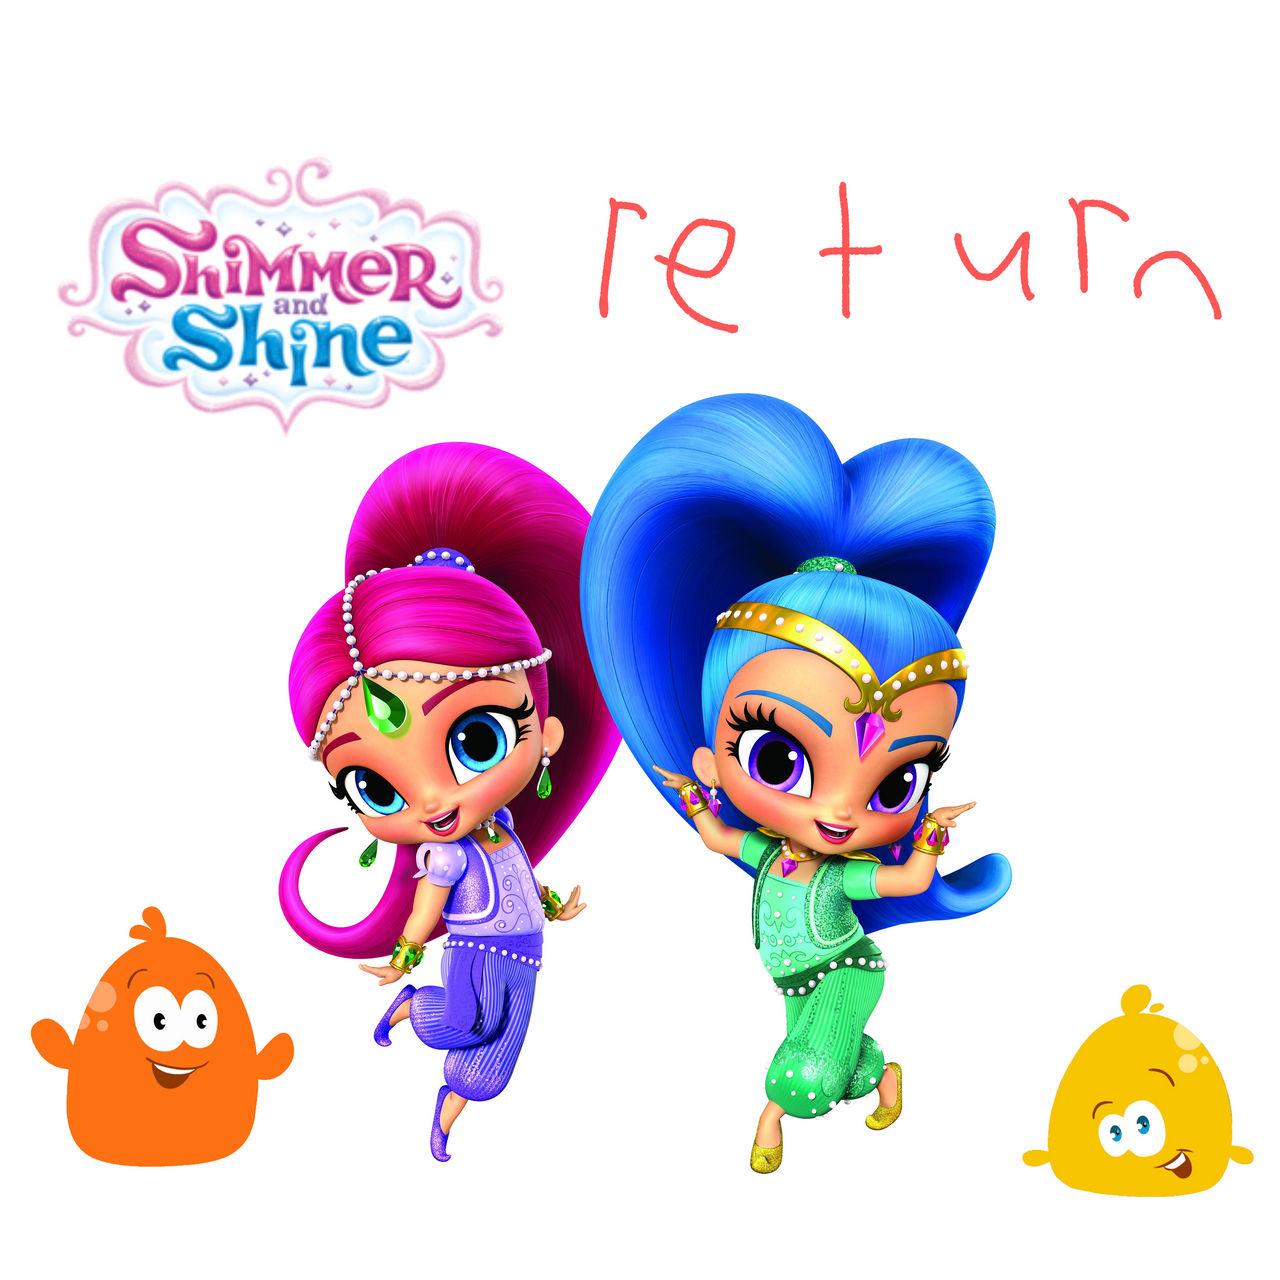 Shimmer And Shine Return by Pucca89 on DeviantArt